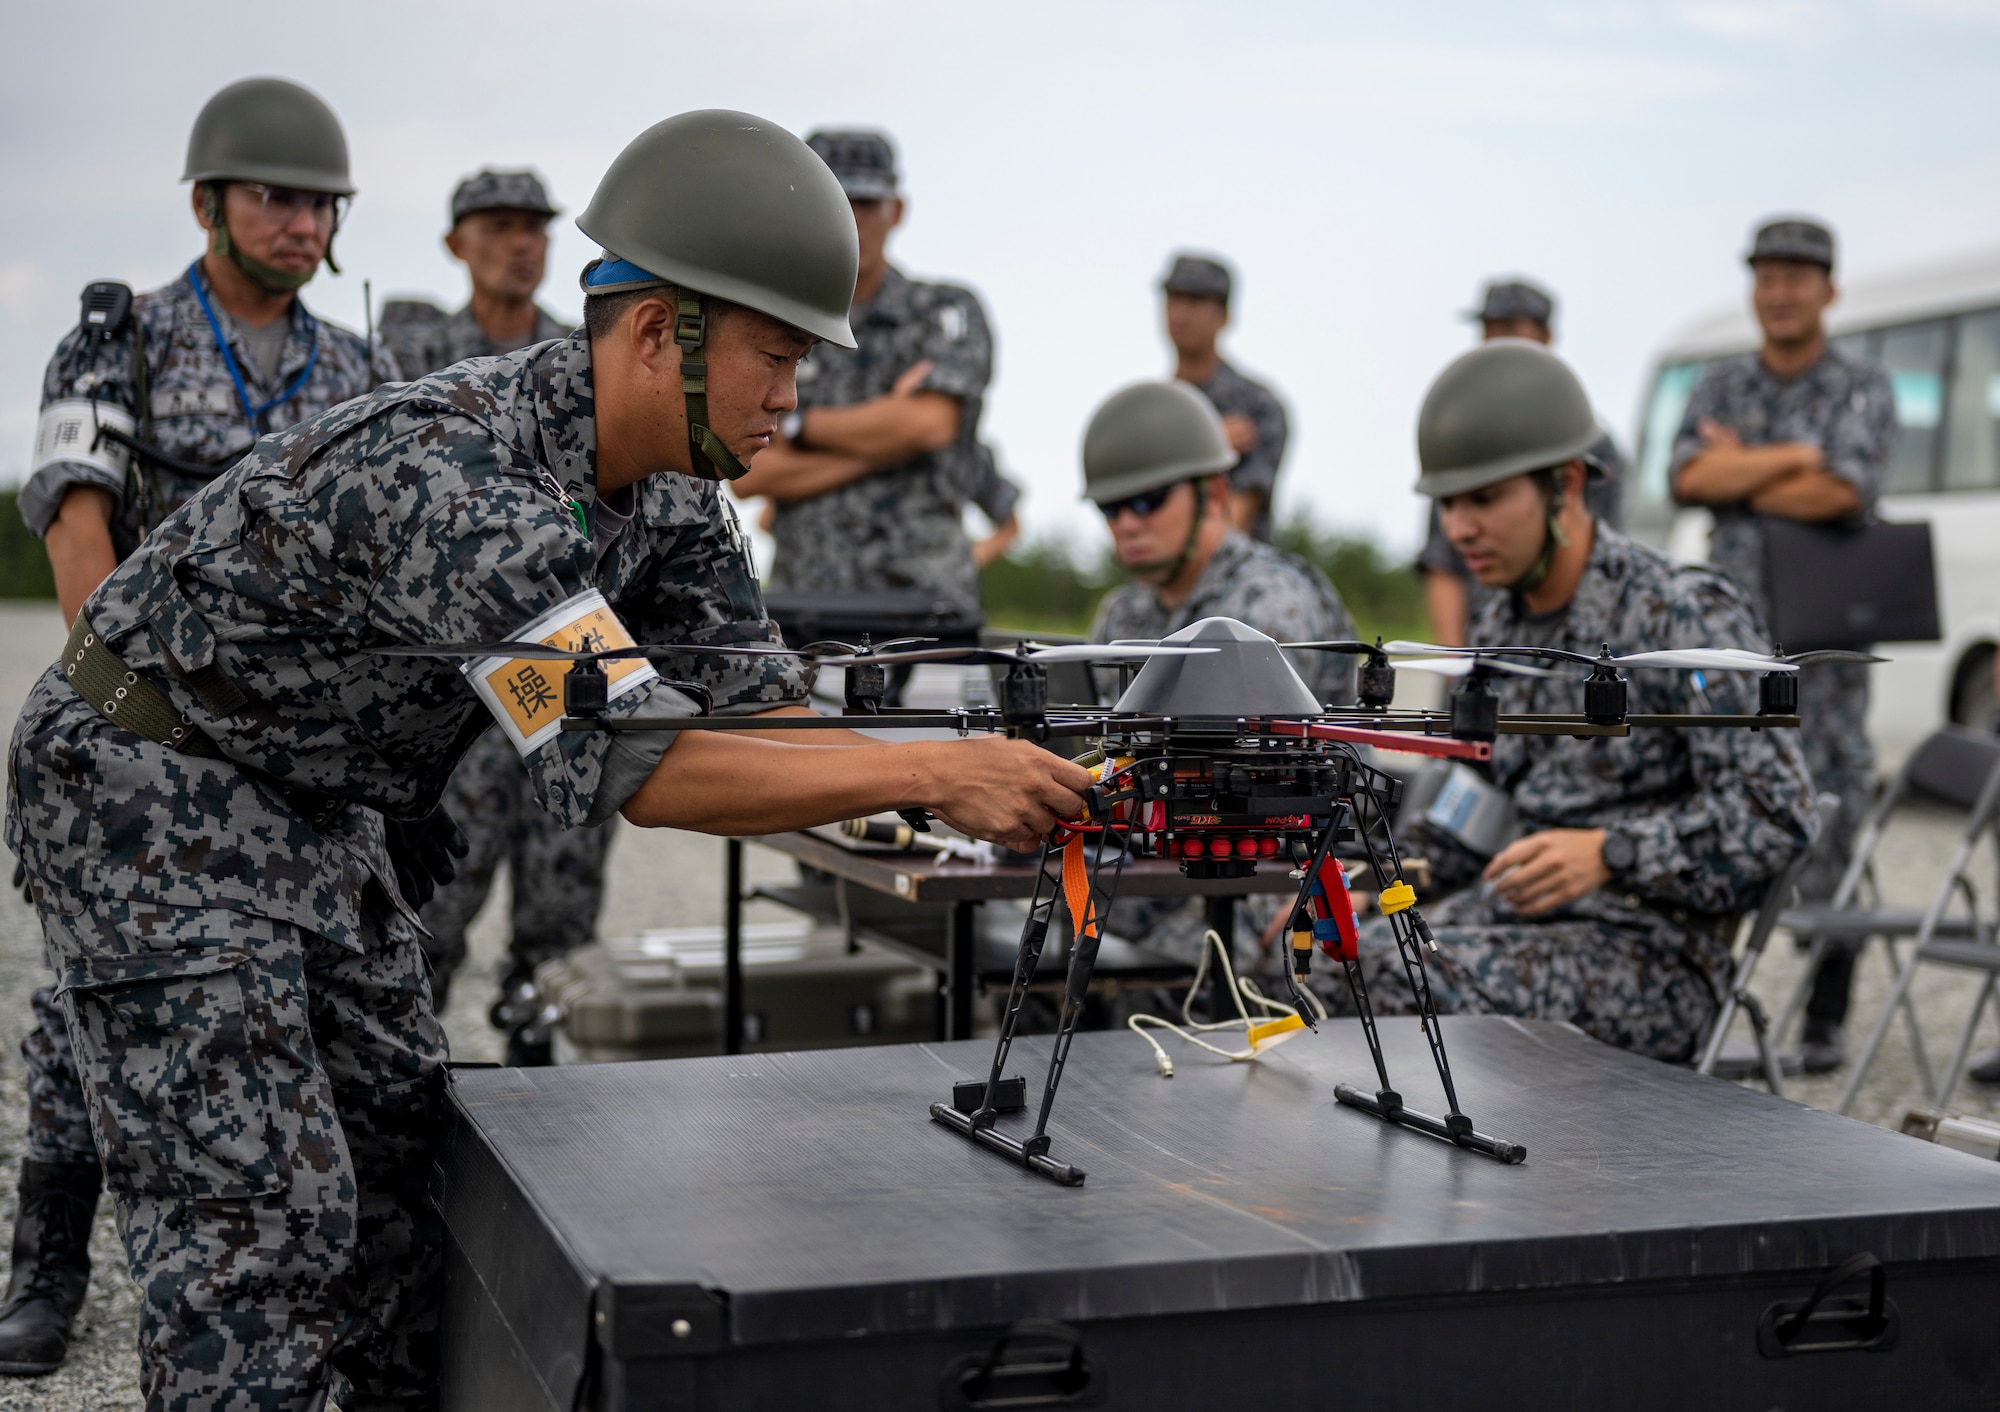 A Japan Air Self-Defense Force Airman assigned to the Western Air Civil Engineering Group sets up a drone during a bilateral live fire exercise.